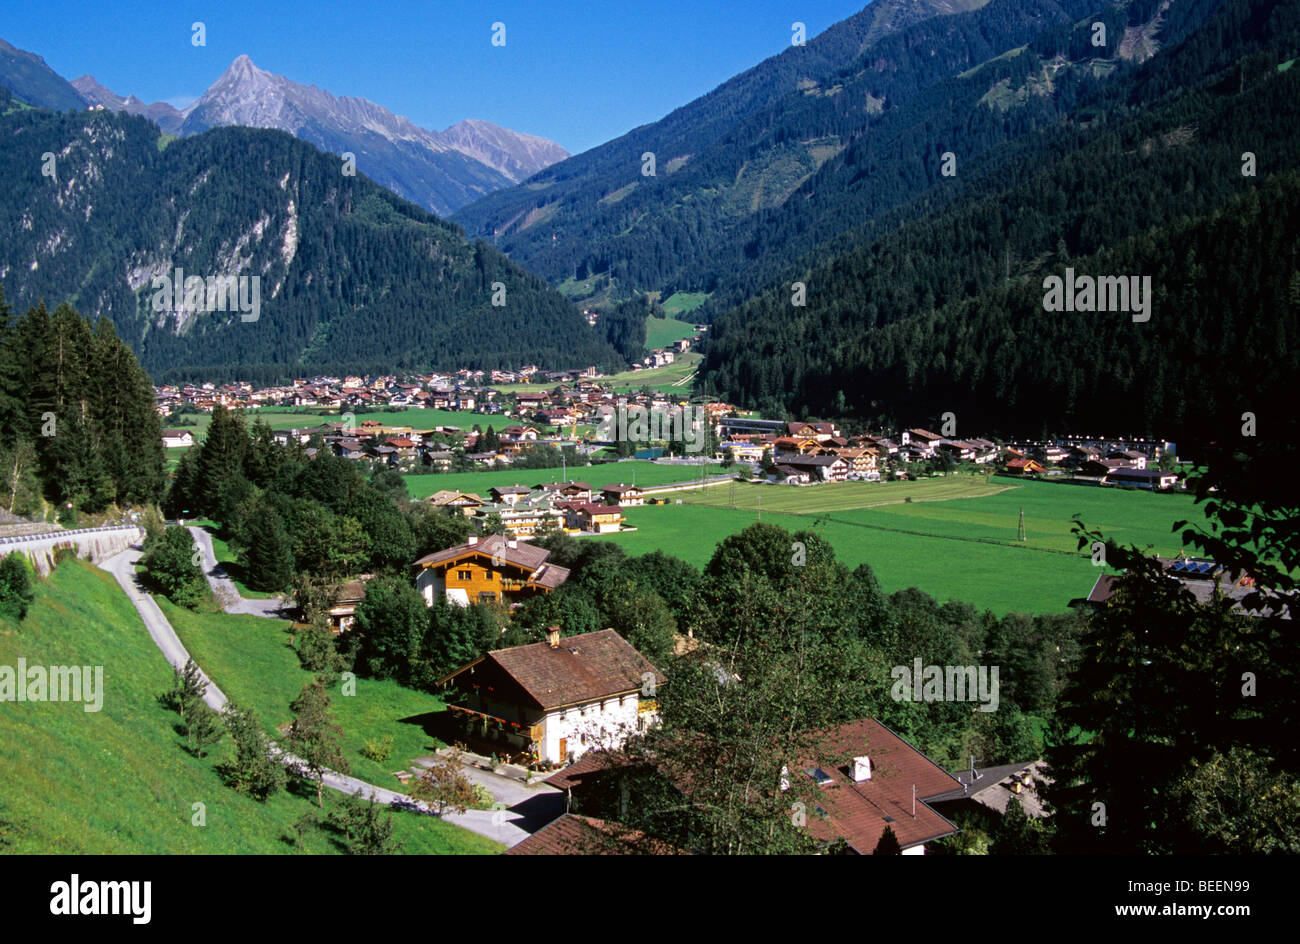 View towards Mayrhofen from near the town of Finkenberg Stock Photo